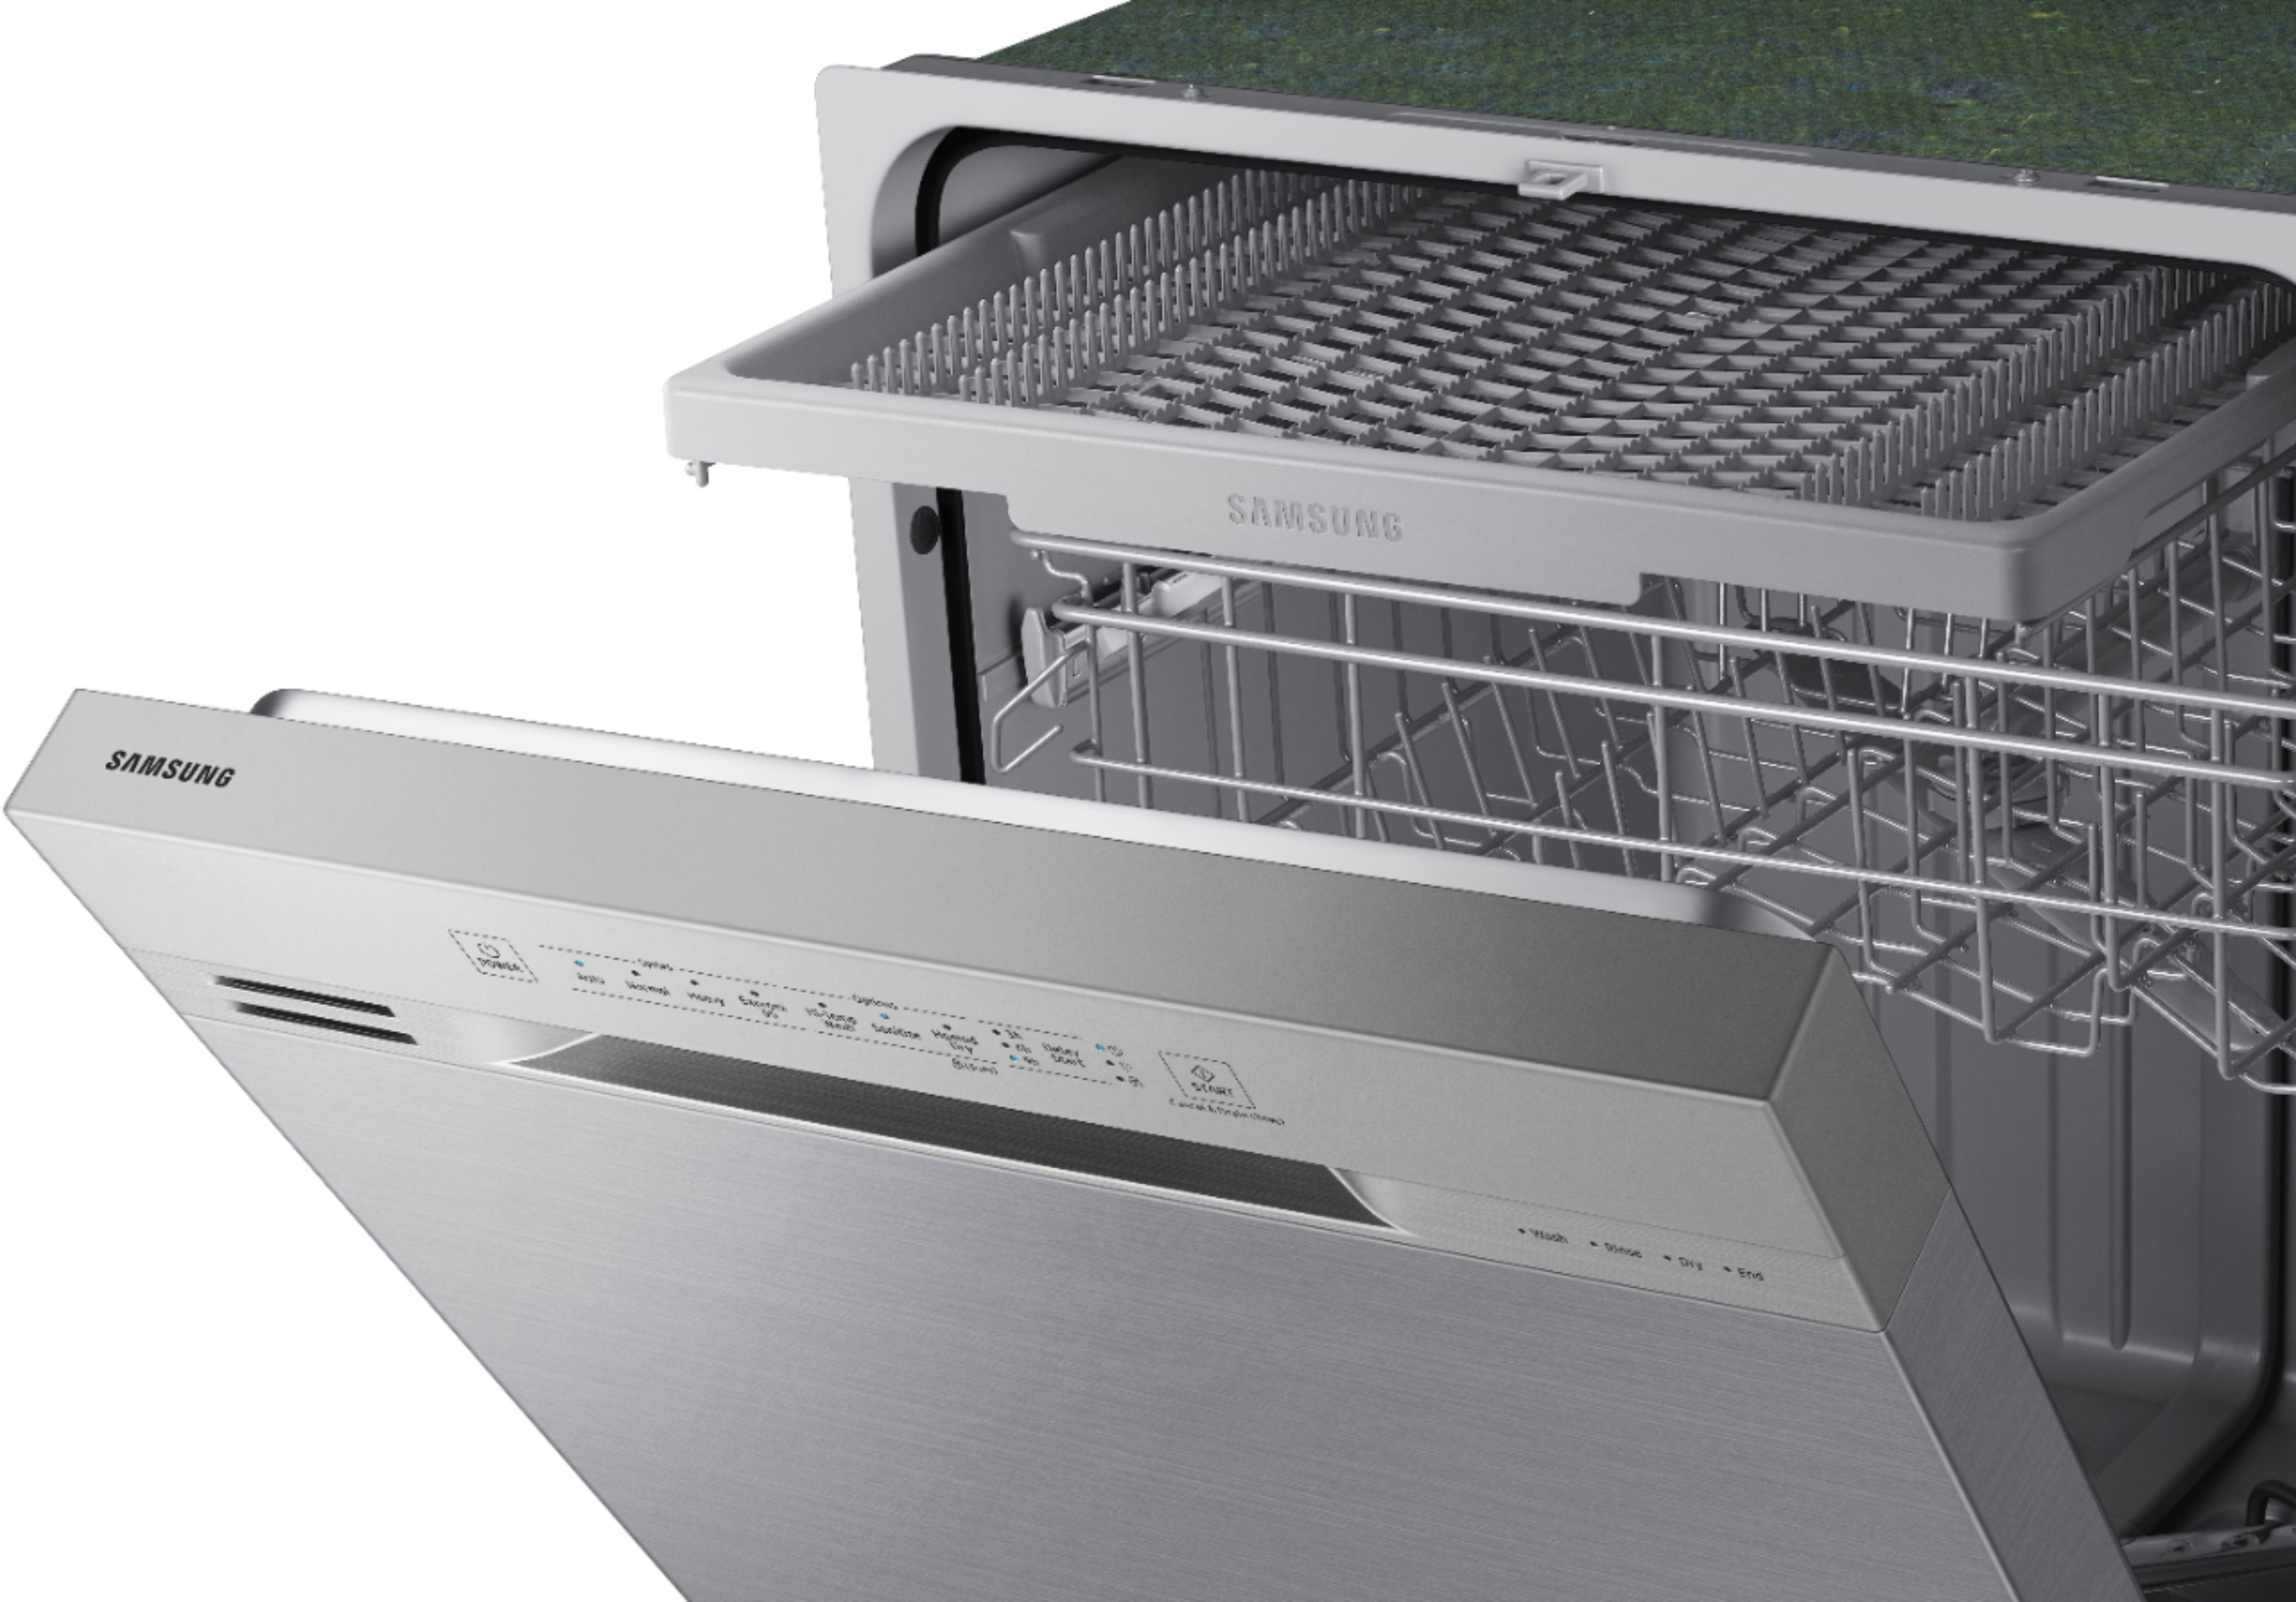 Samsung - 24" Front Control Built-In Dishwasher - Stainless steel at